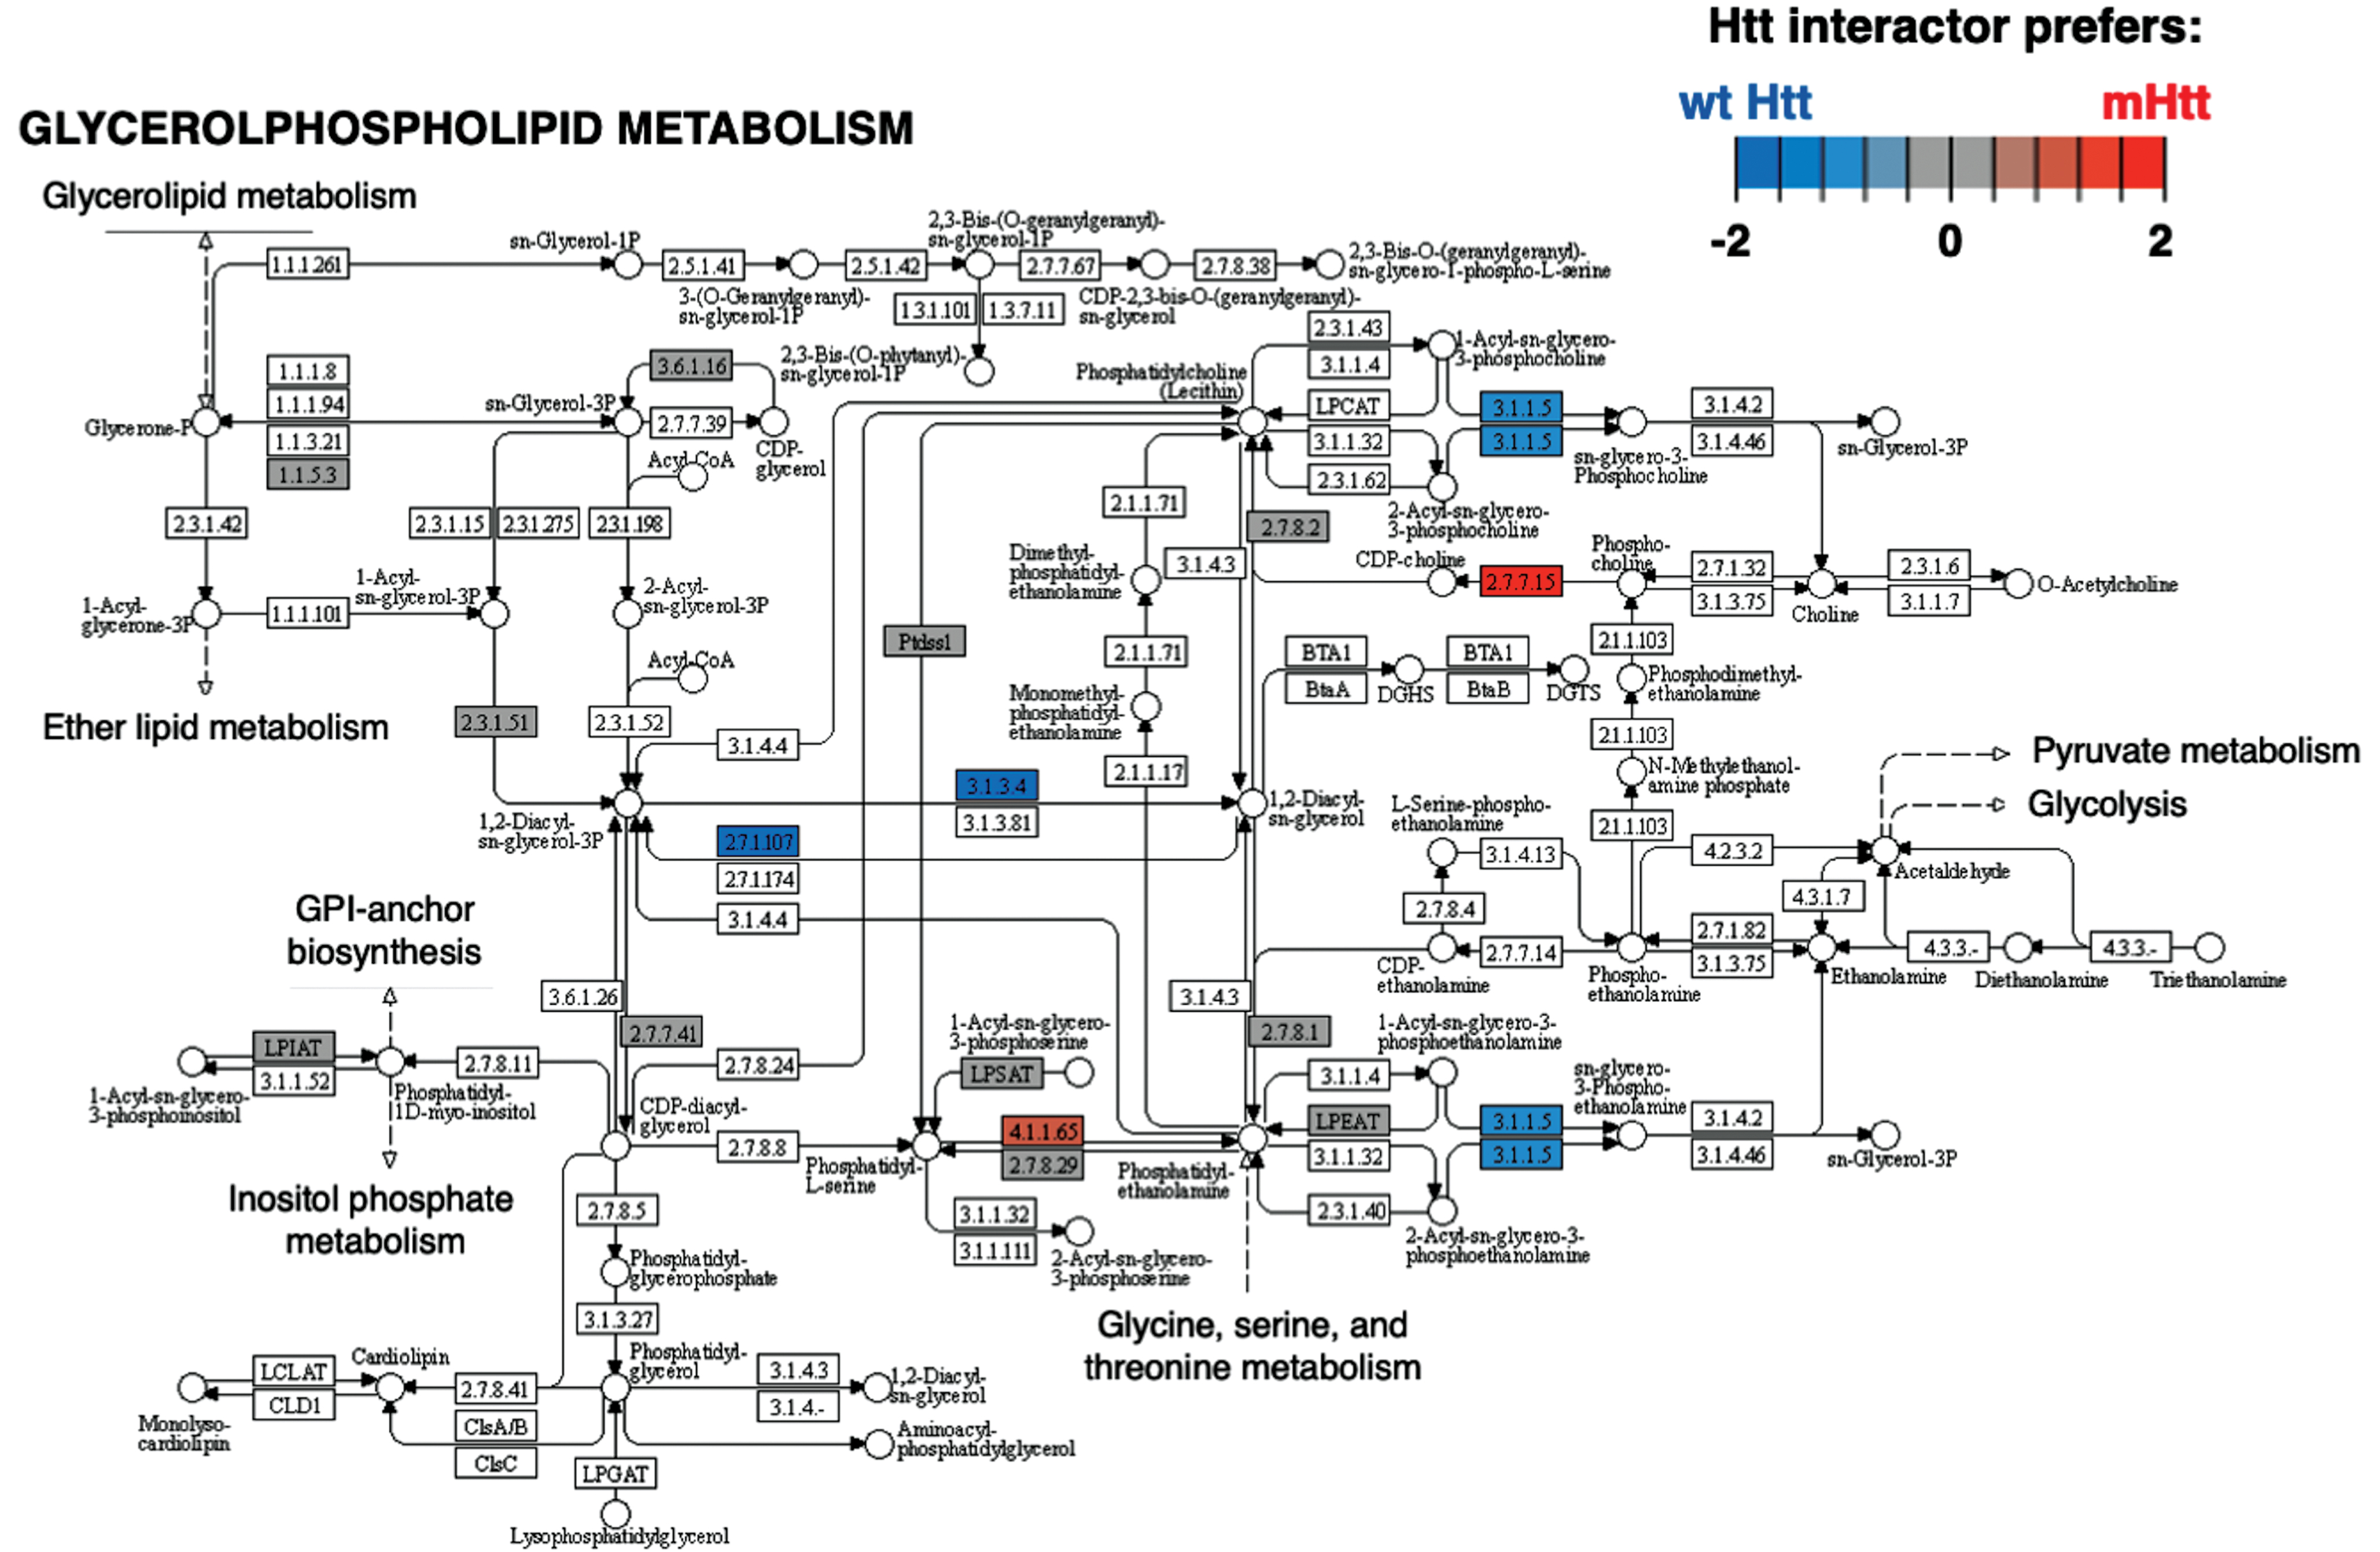 Glycerophospholipid metabolism KEGG pathway of the chromatin cluster. The Glycerophospholipid metabolism pathway of the chromatin organization cluster was found to be most significant (Supplementary Table 2). Preferred interactions of mutant Htt (mHtt) or wt Htt with pathway components are illustrated by red to blue color key.